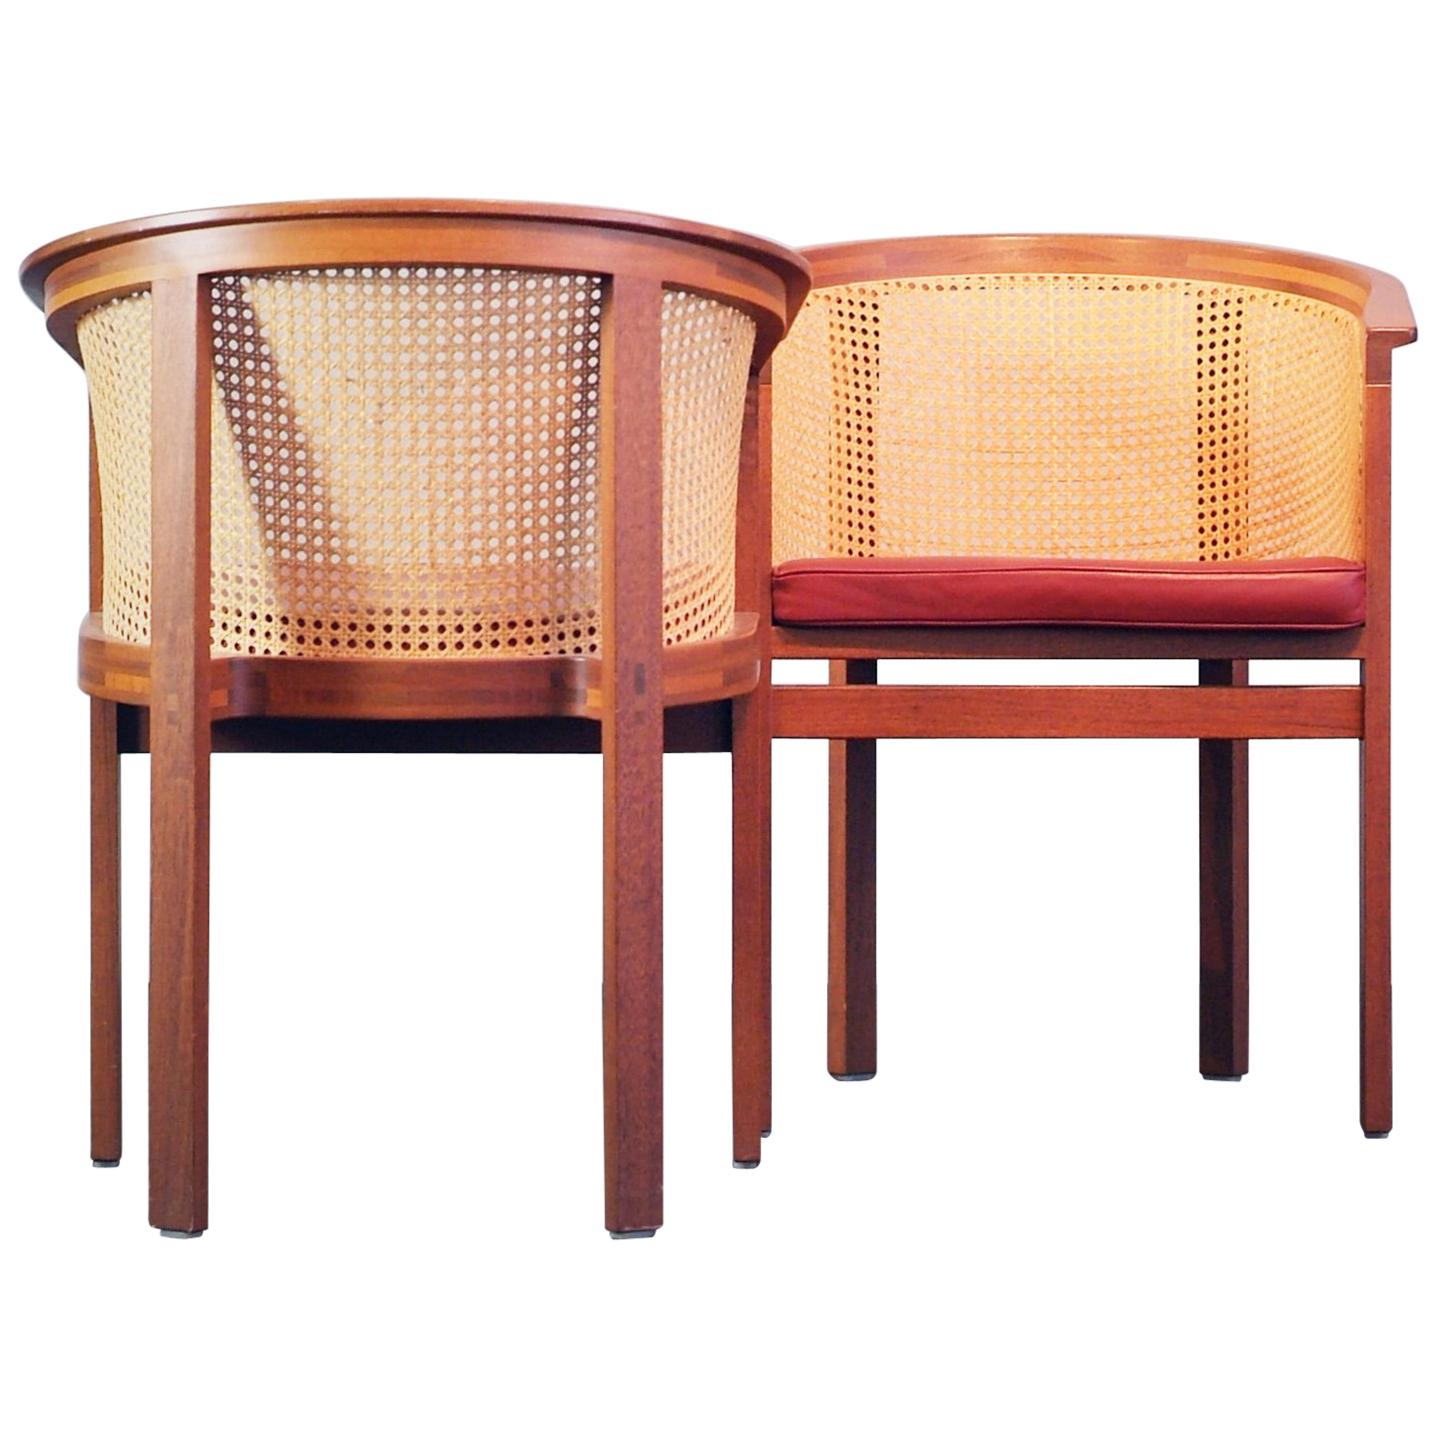 Rud Thygesen Side / Dining Chairs King Series Botium 1970s Cane Mahogany Leather